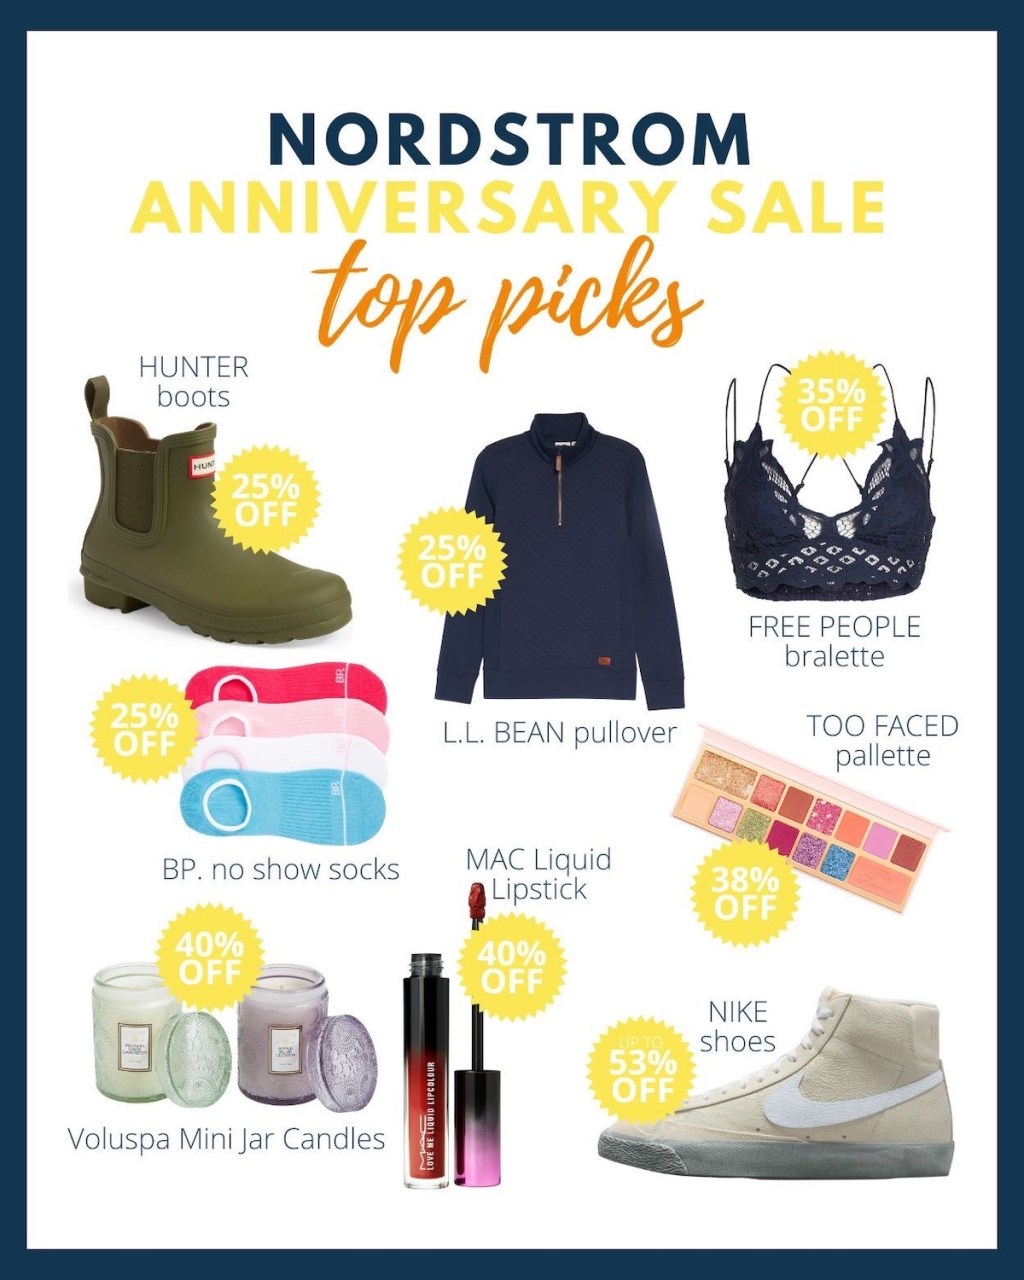 How I Would Spend $500 During Nordstrom Anniversary Sale Early